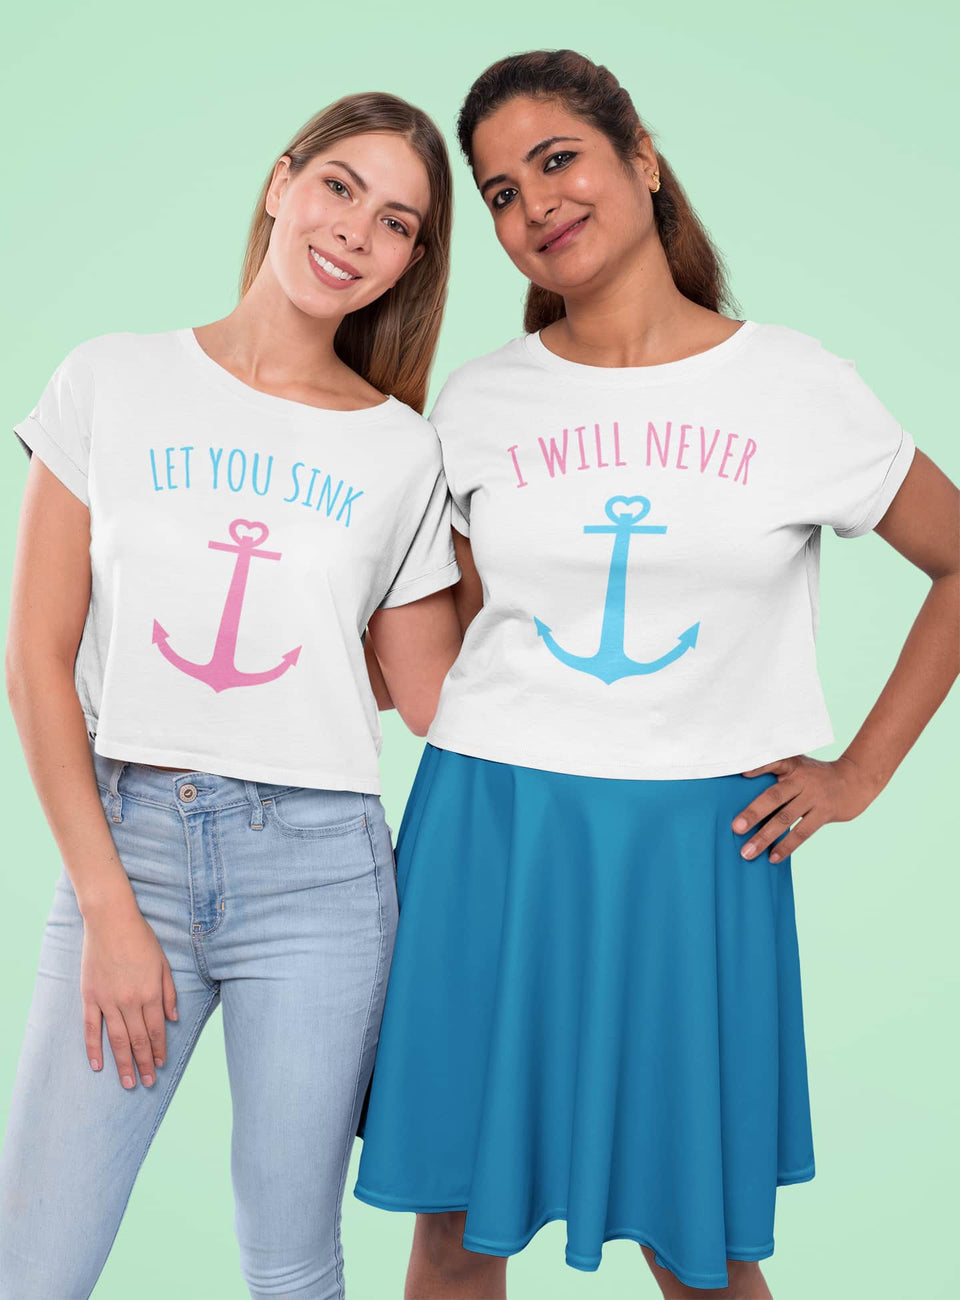 I Will Never Let You Sink Best Friend - BFF Shirts